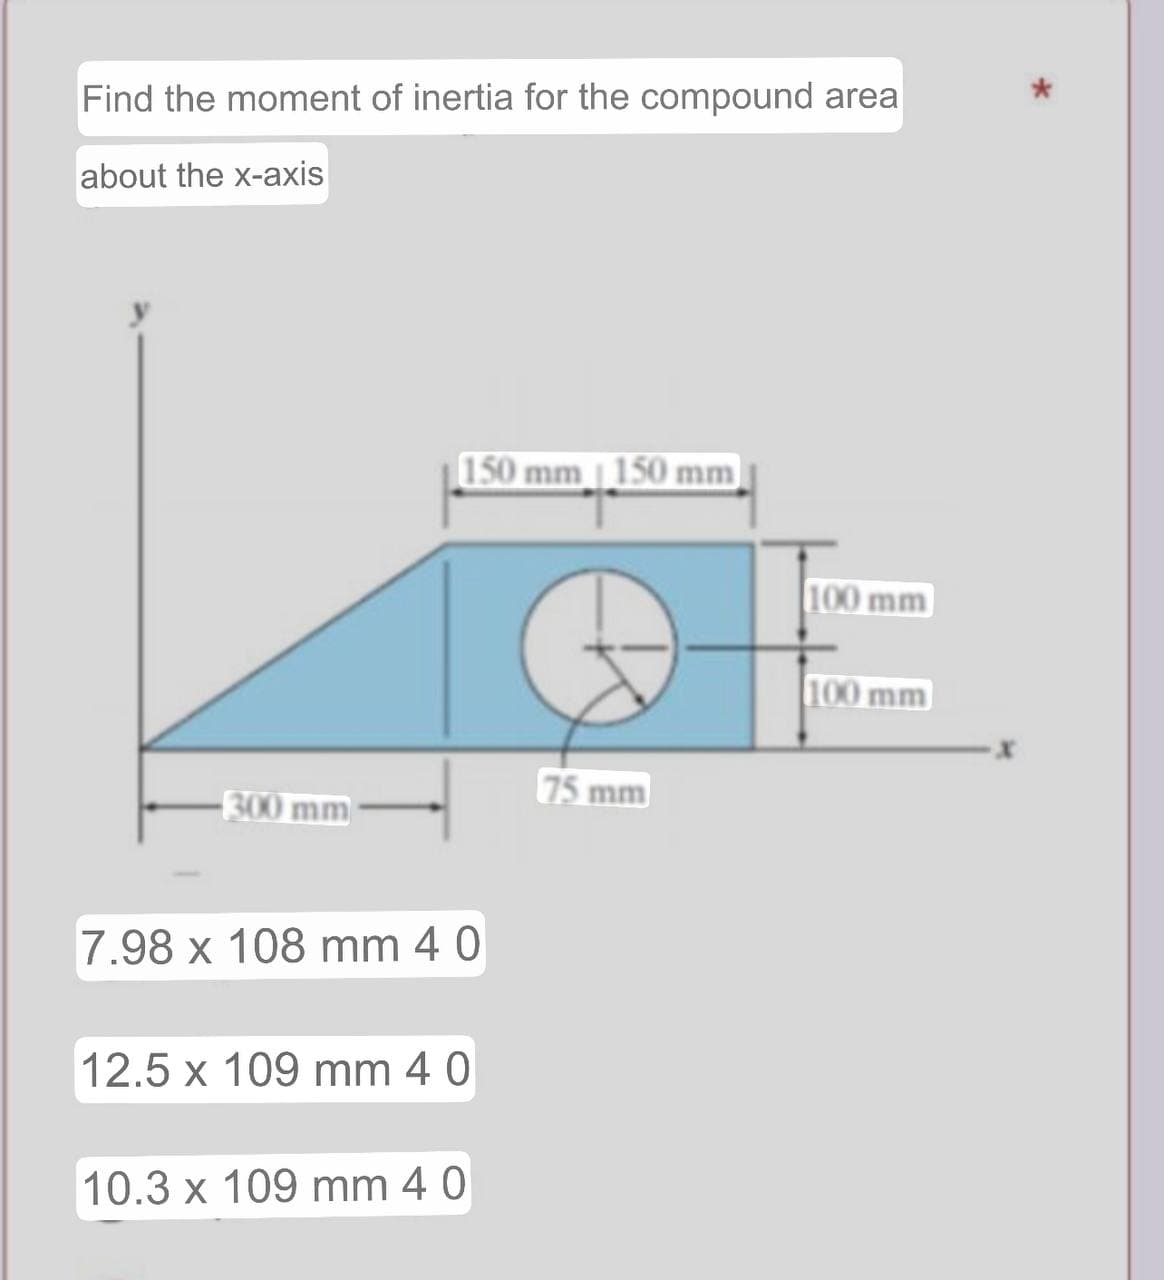 Find the moment of inertia for the compound area
about the x-axis
-300 mm
150 mm 150 mm
7.98 x 108 mm 40
12.5 x 109 mm 40
10.3 x 109 mm 40
75 mm
100 mm
100 mm